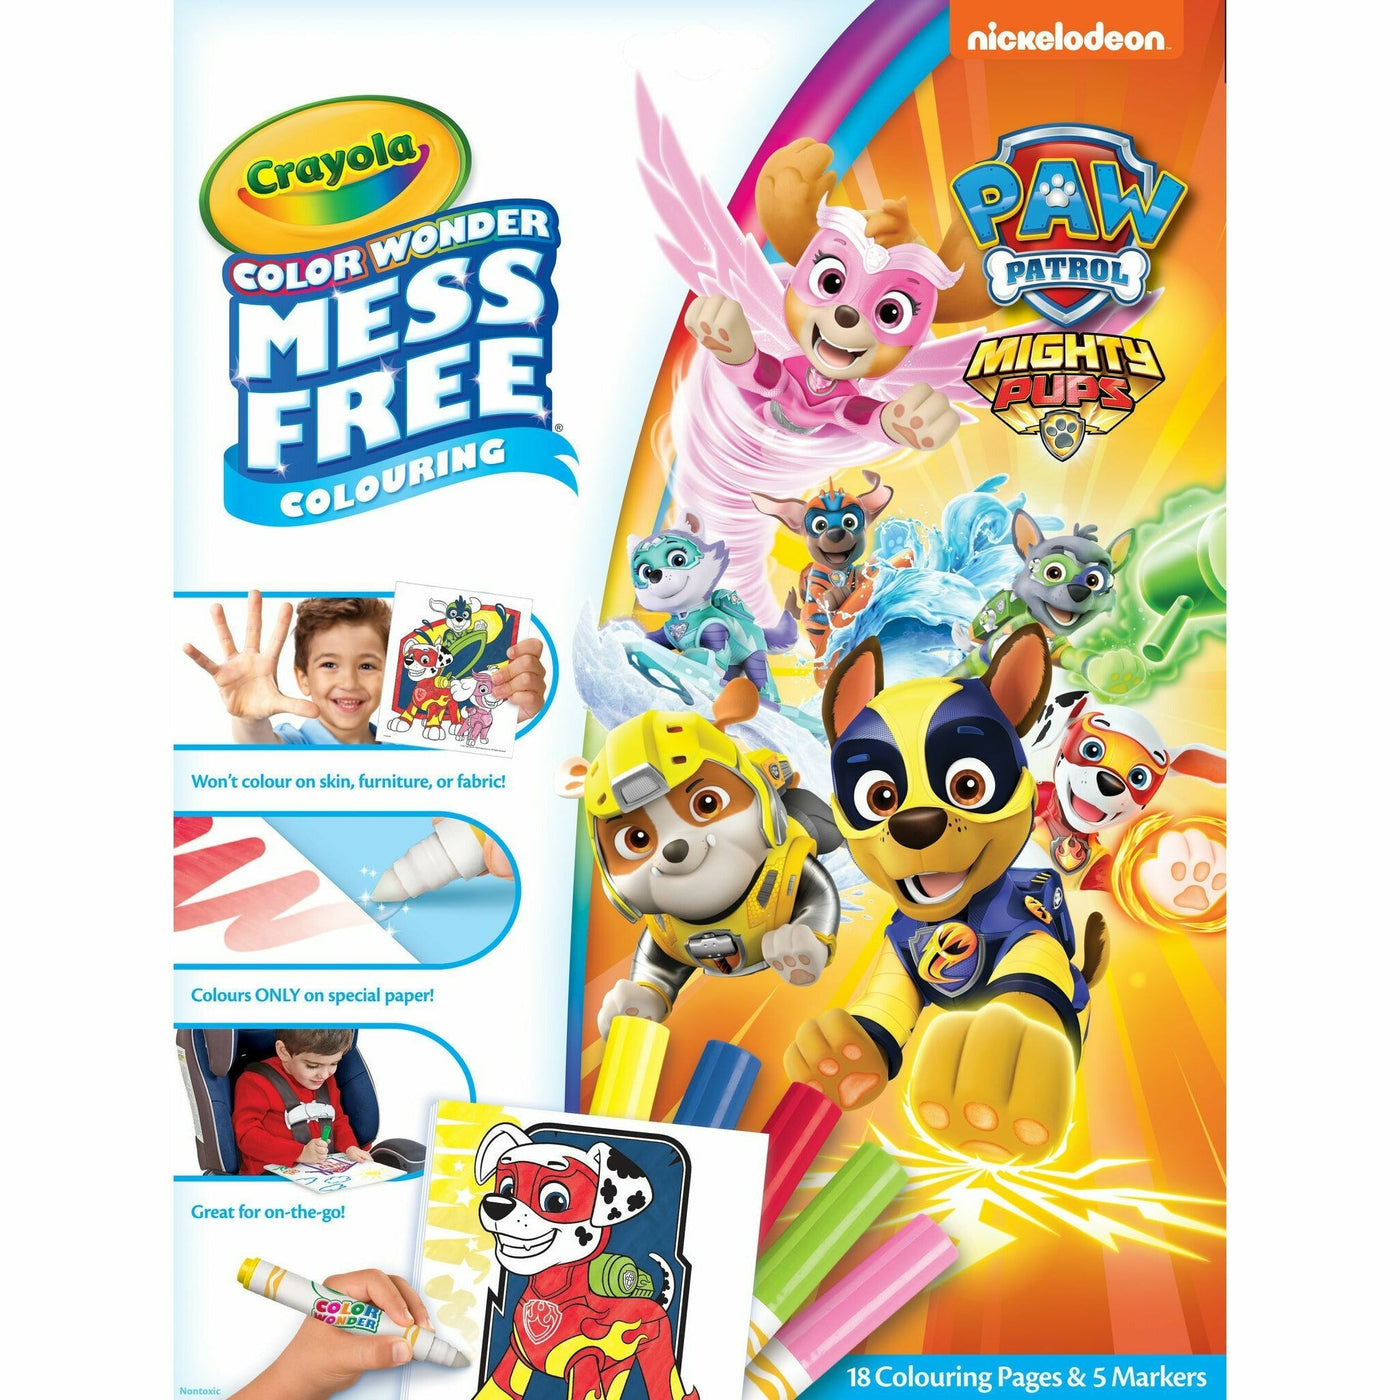 Colour Wonder Mess Free Colouring: Paw Patrol Mighty Pups-Colouring-Crayola-Yes Bebe